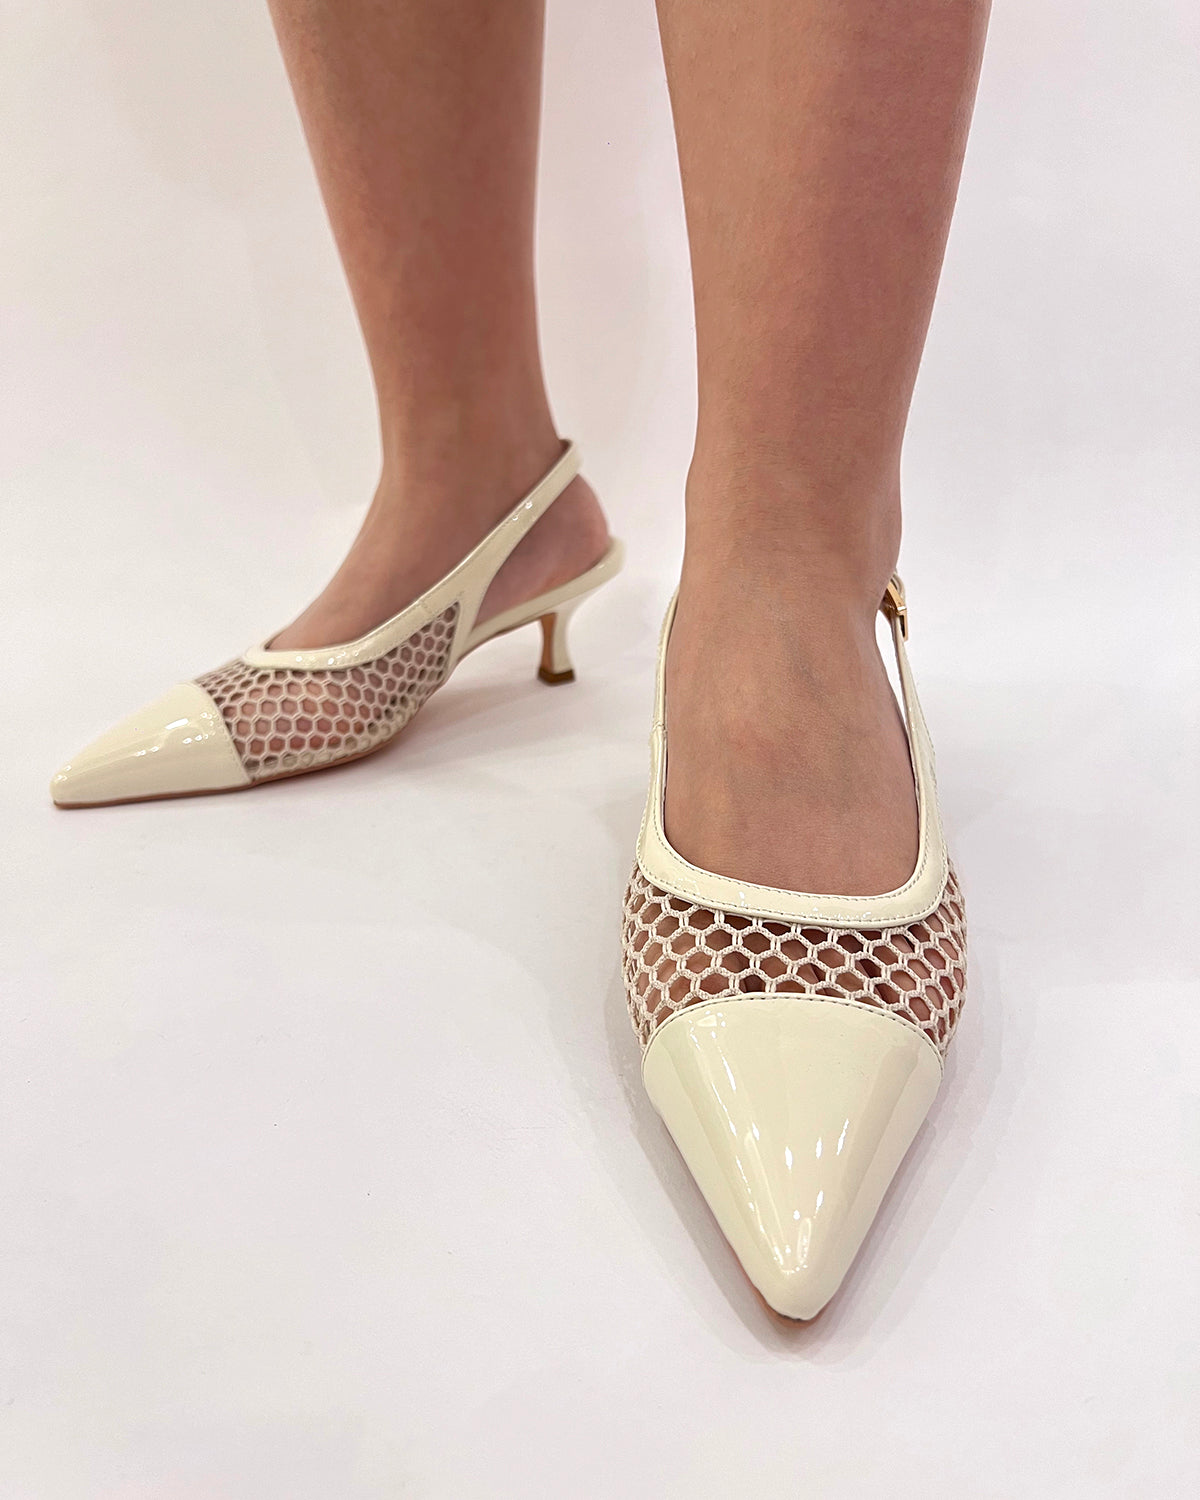 Patent leather pointed toe slingback mesh low heels for women